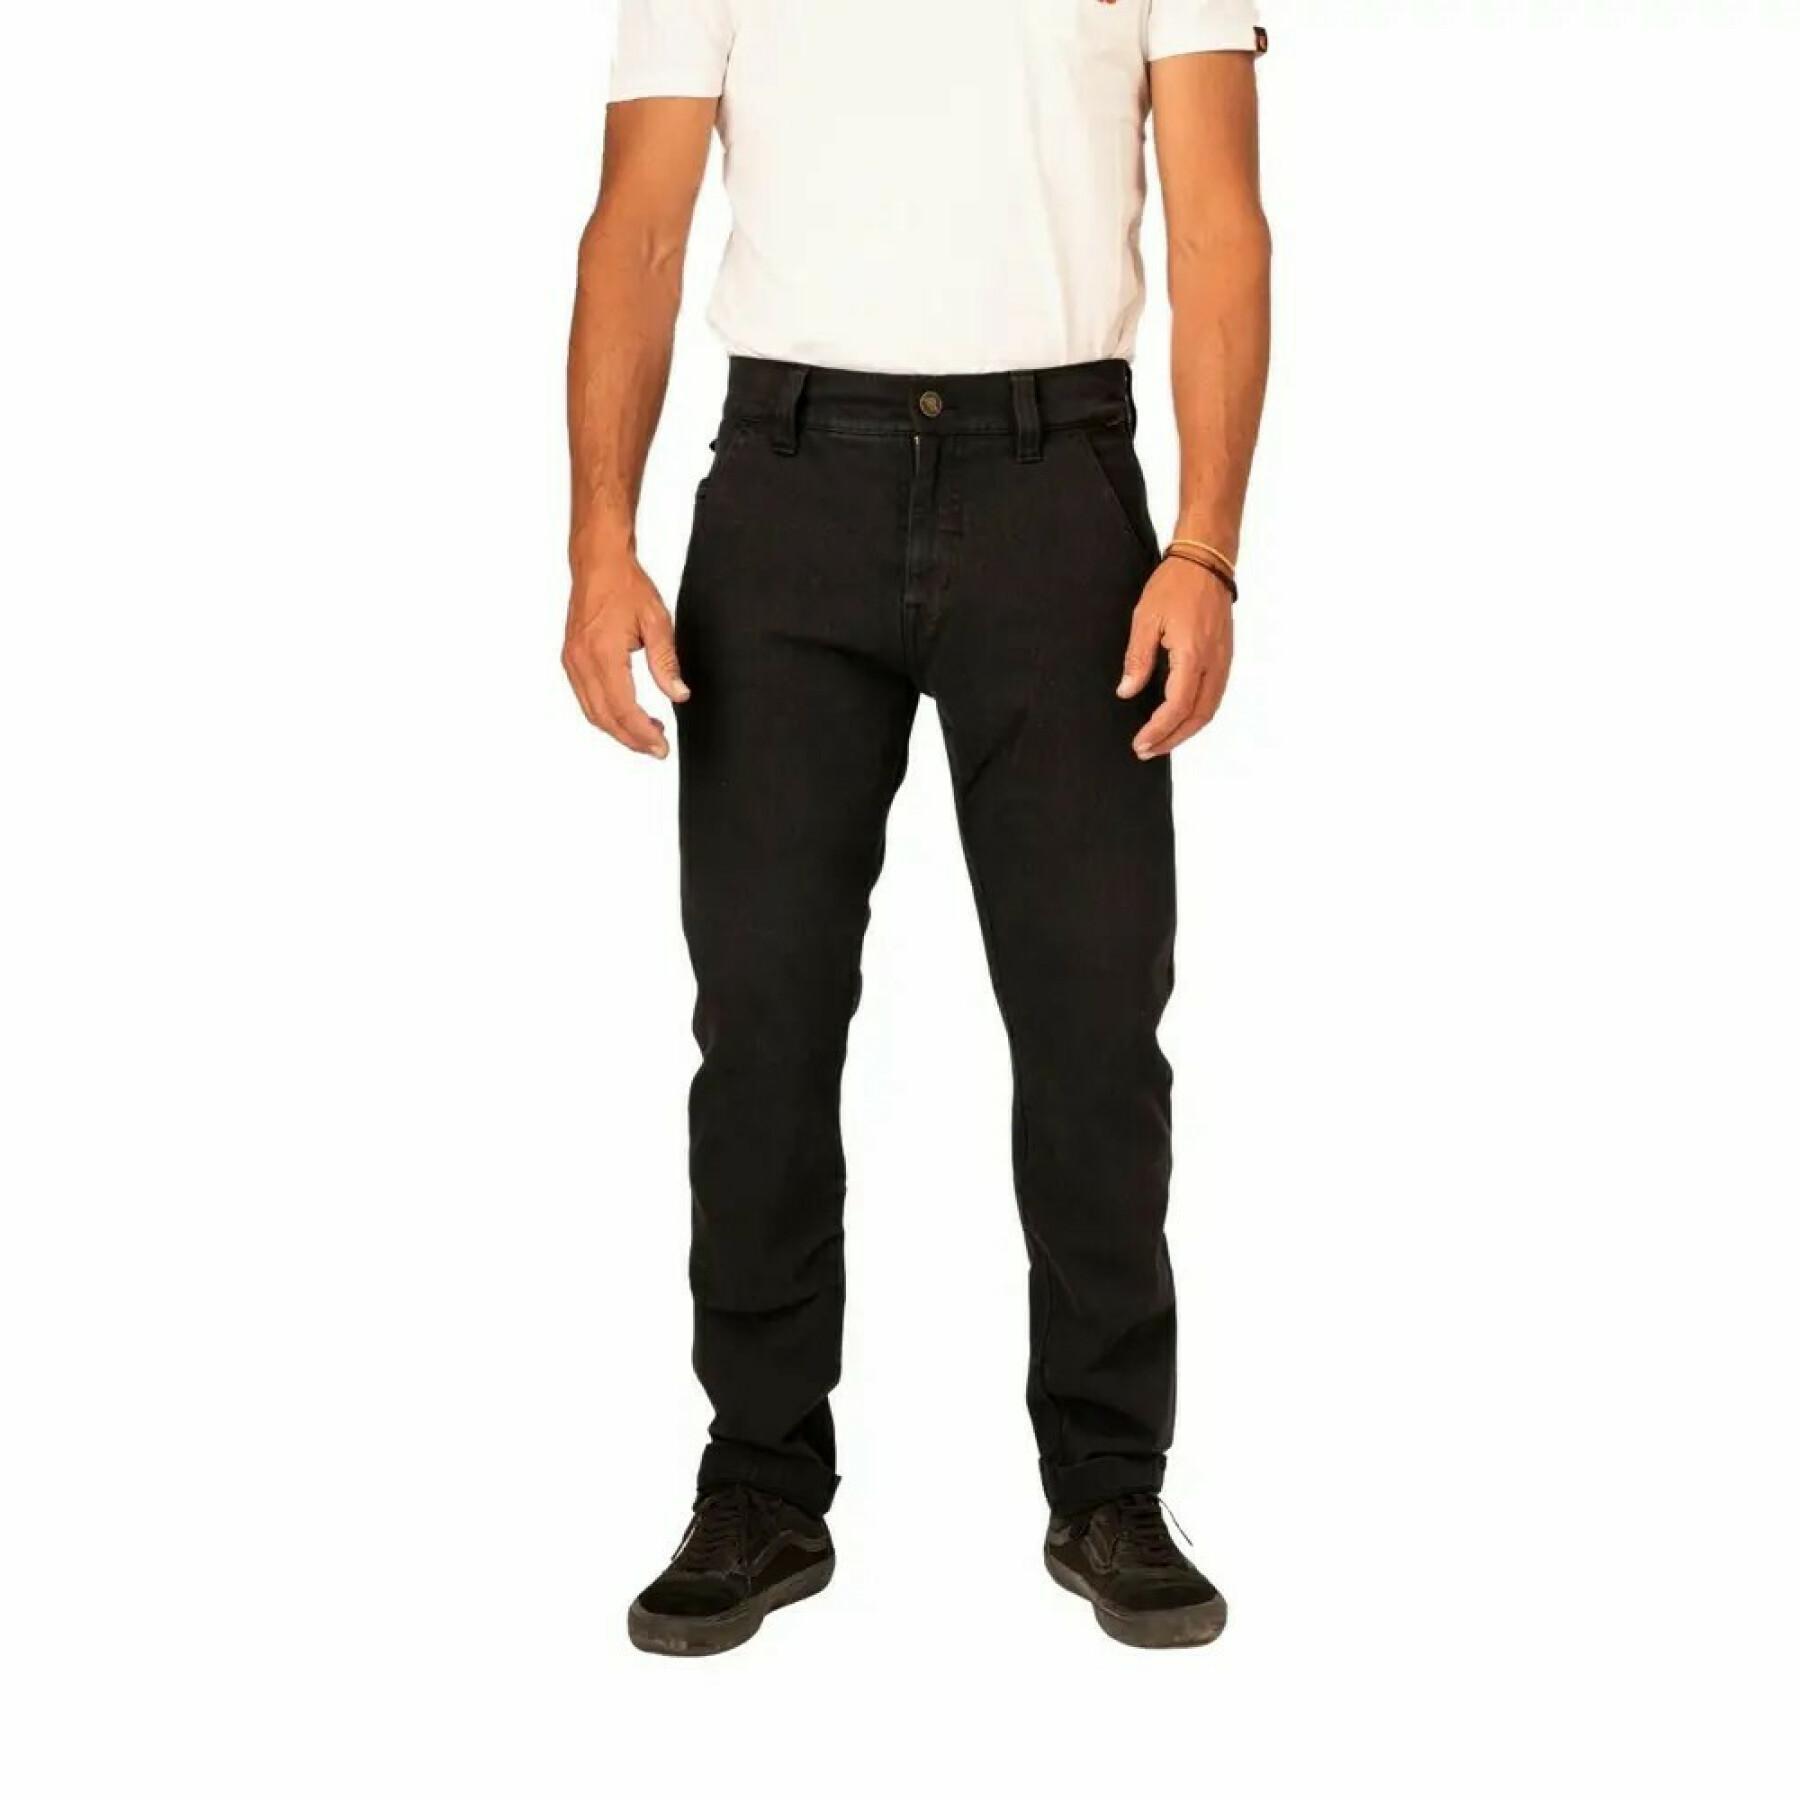 Motorcycle pants Riding Culture Chino LT